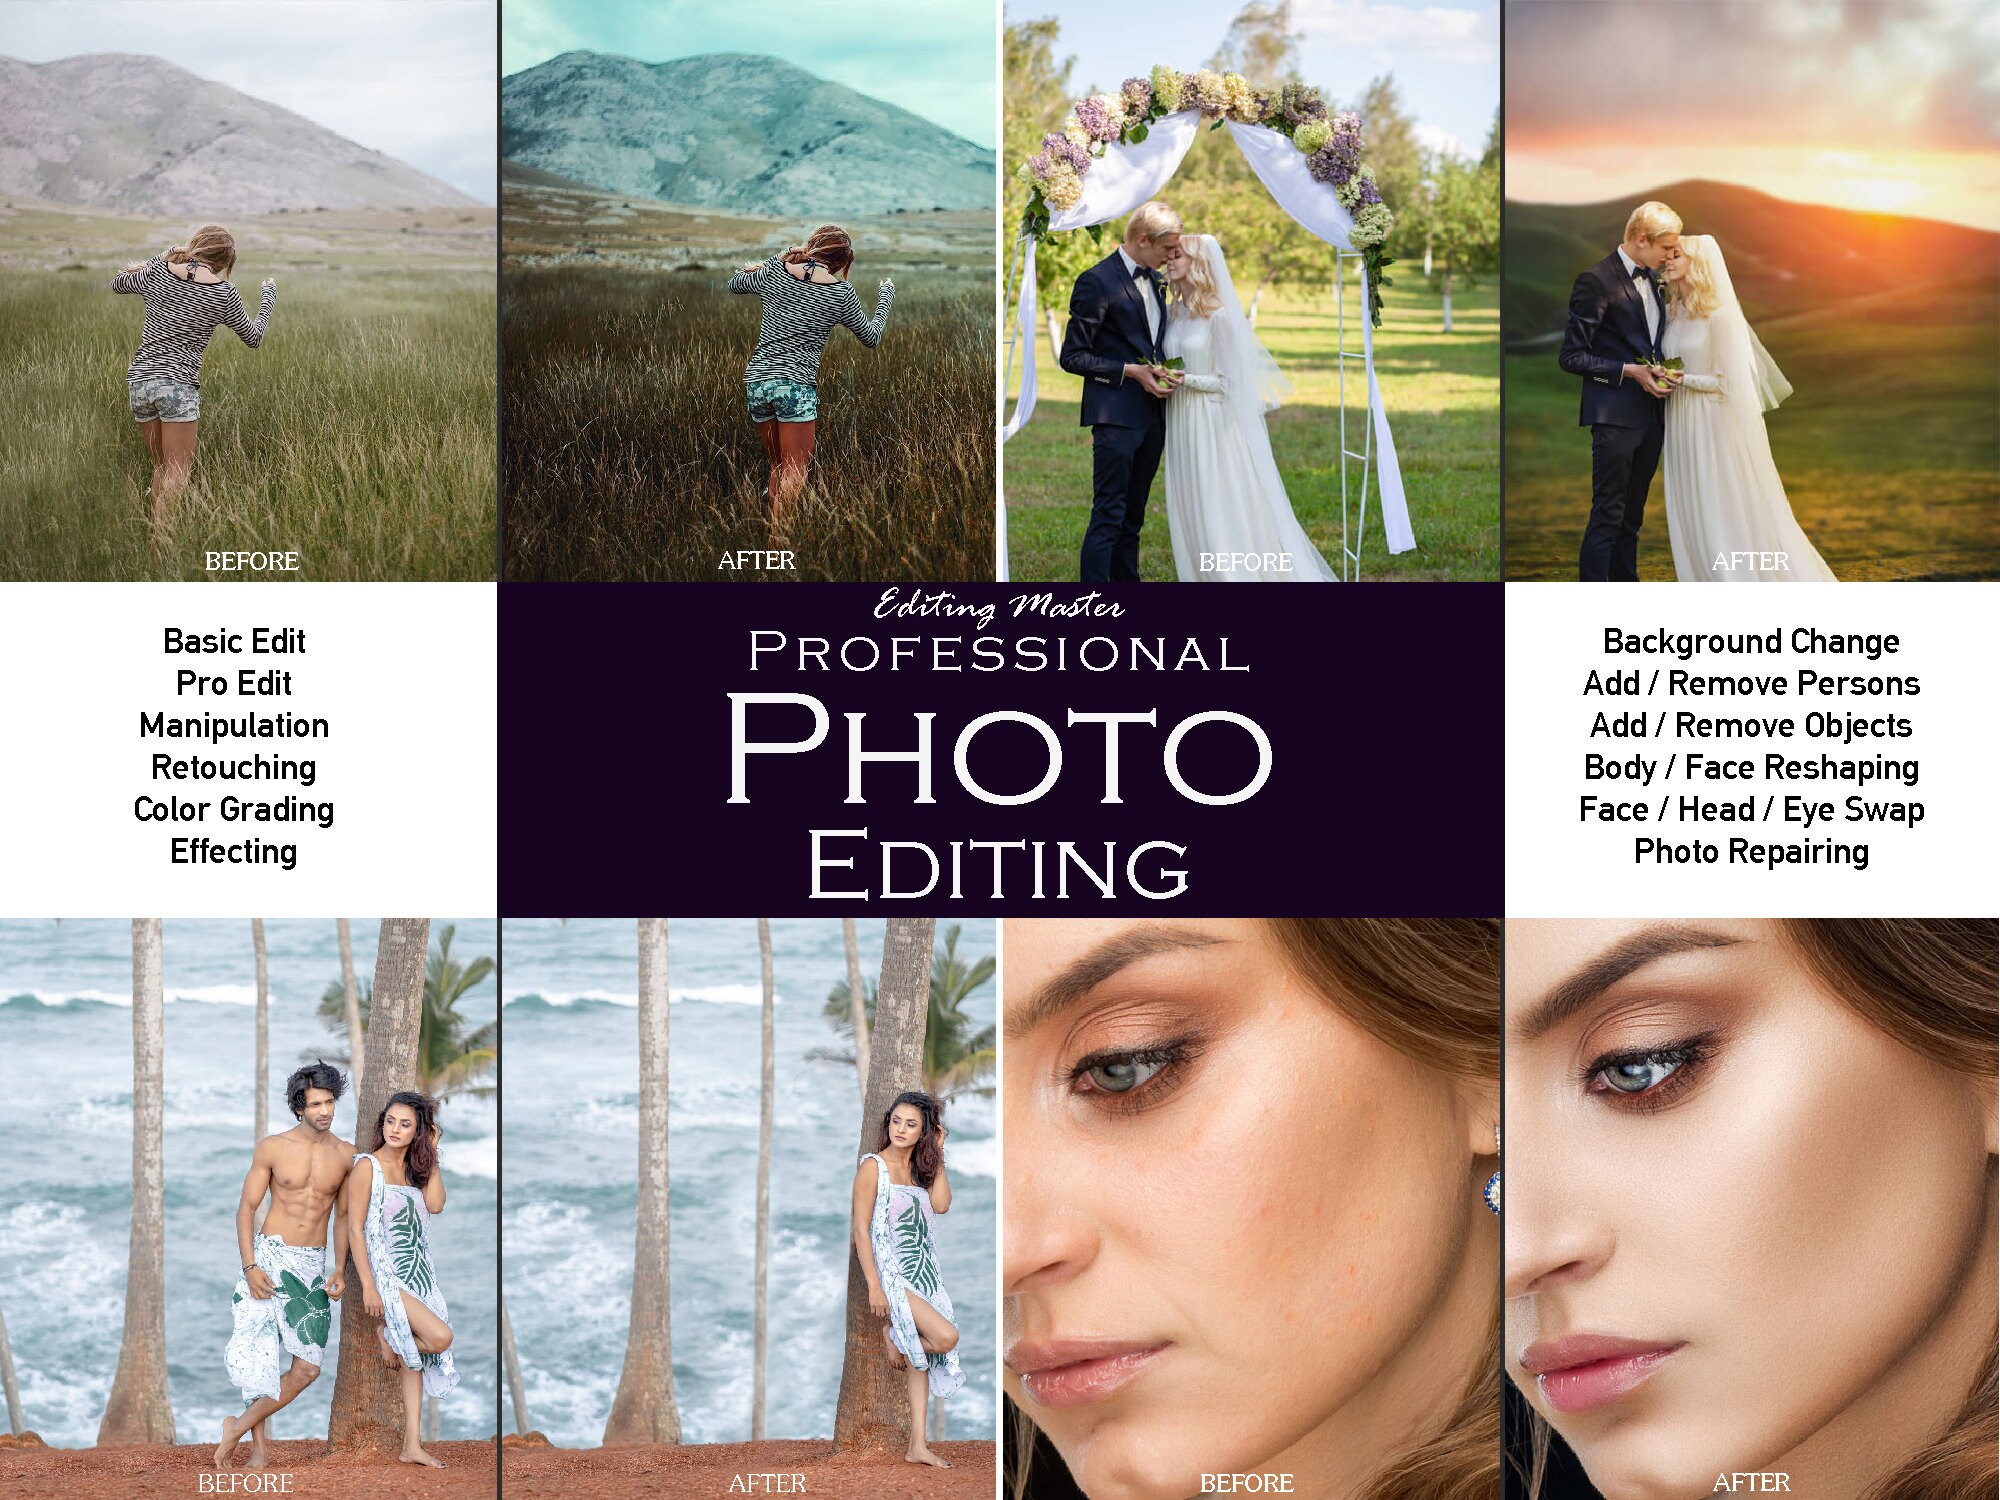 Any Kind of Professional Photo Editing Services background - Etsy